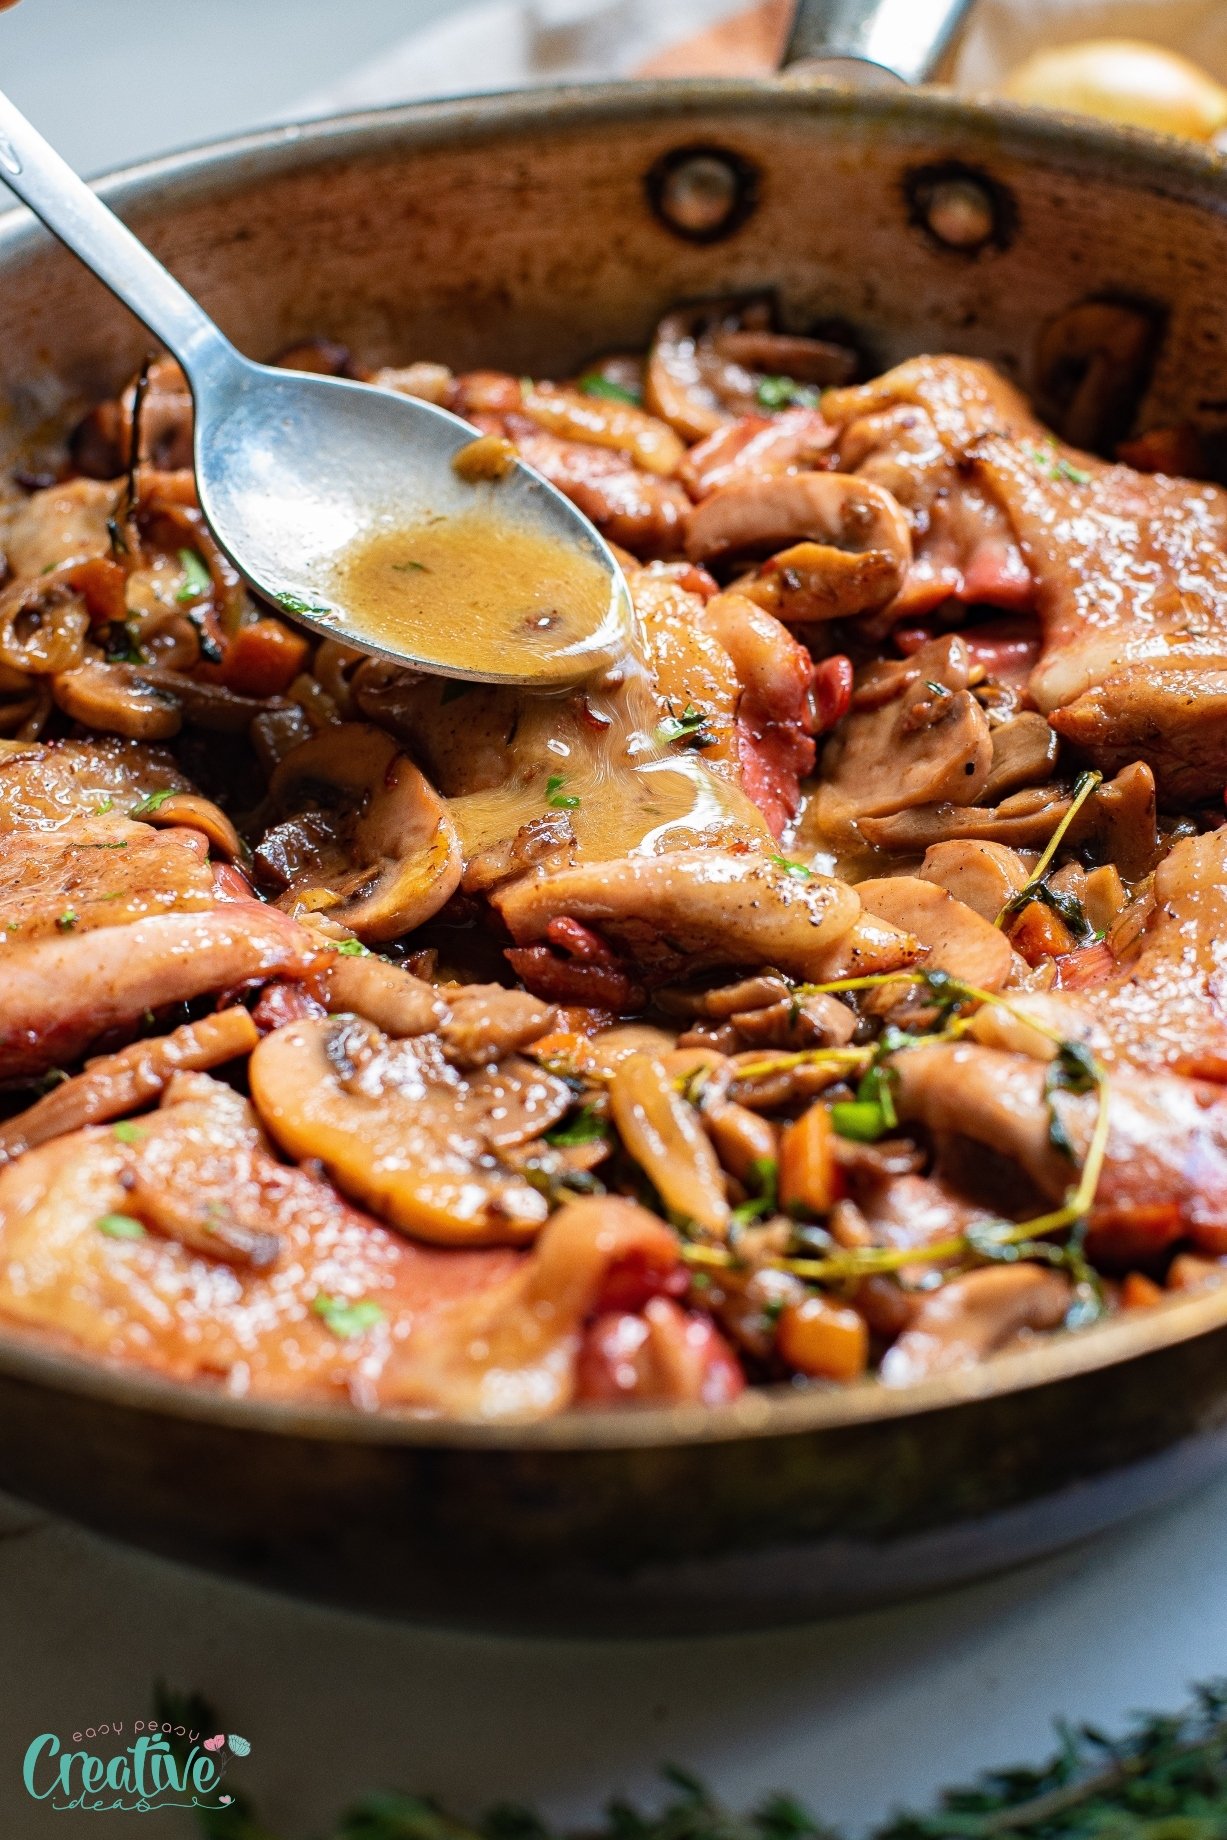 The combination of bone in skillet chicken thighs and mushrooms sizzling in a pan creates a delectable dish that is sure to make your mouth water.